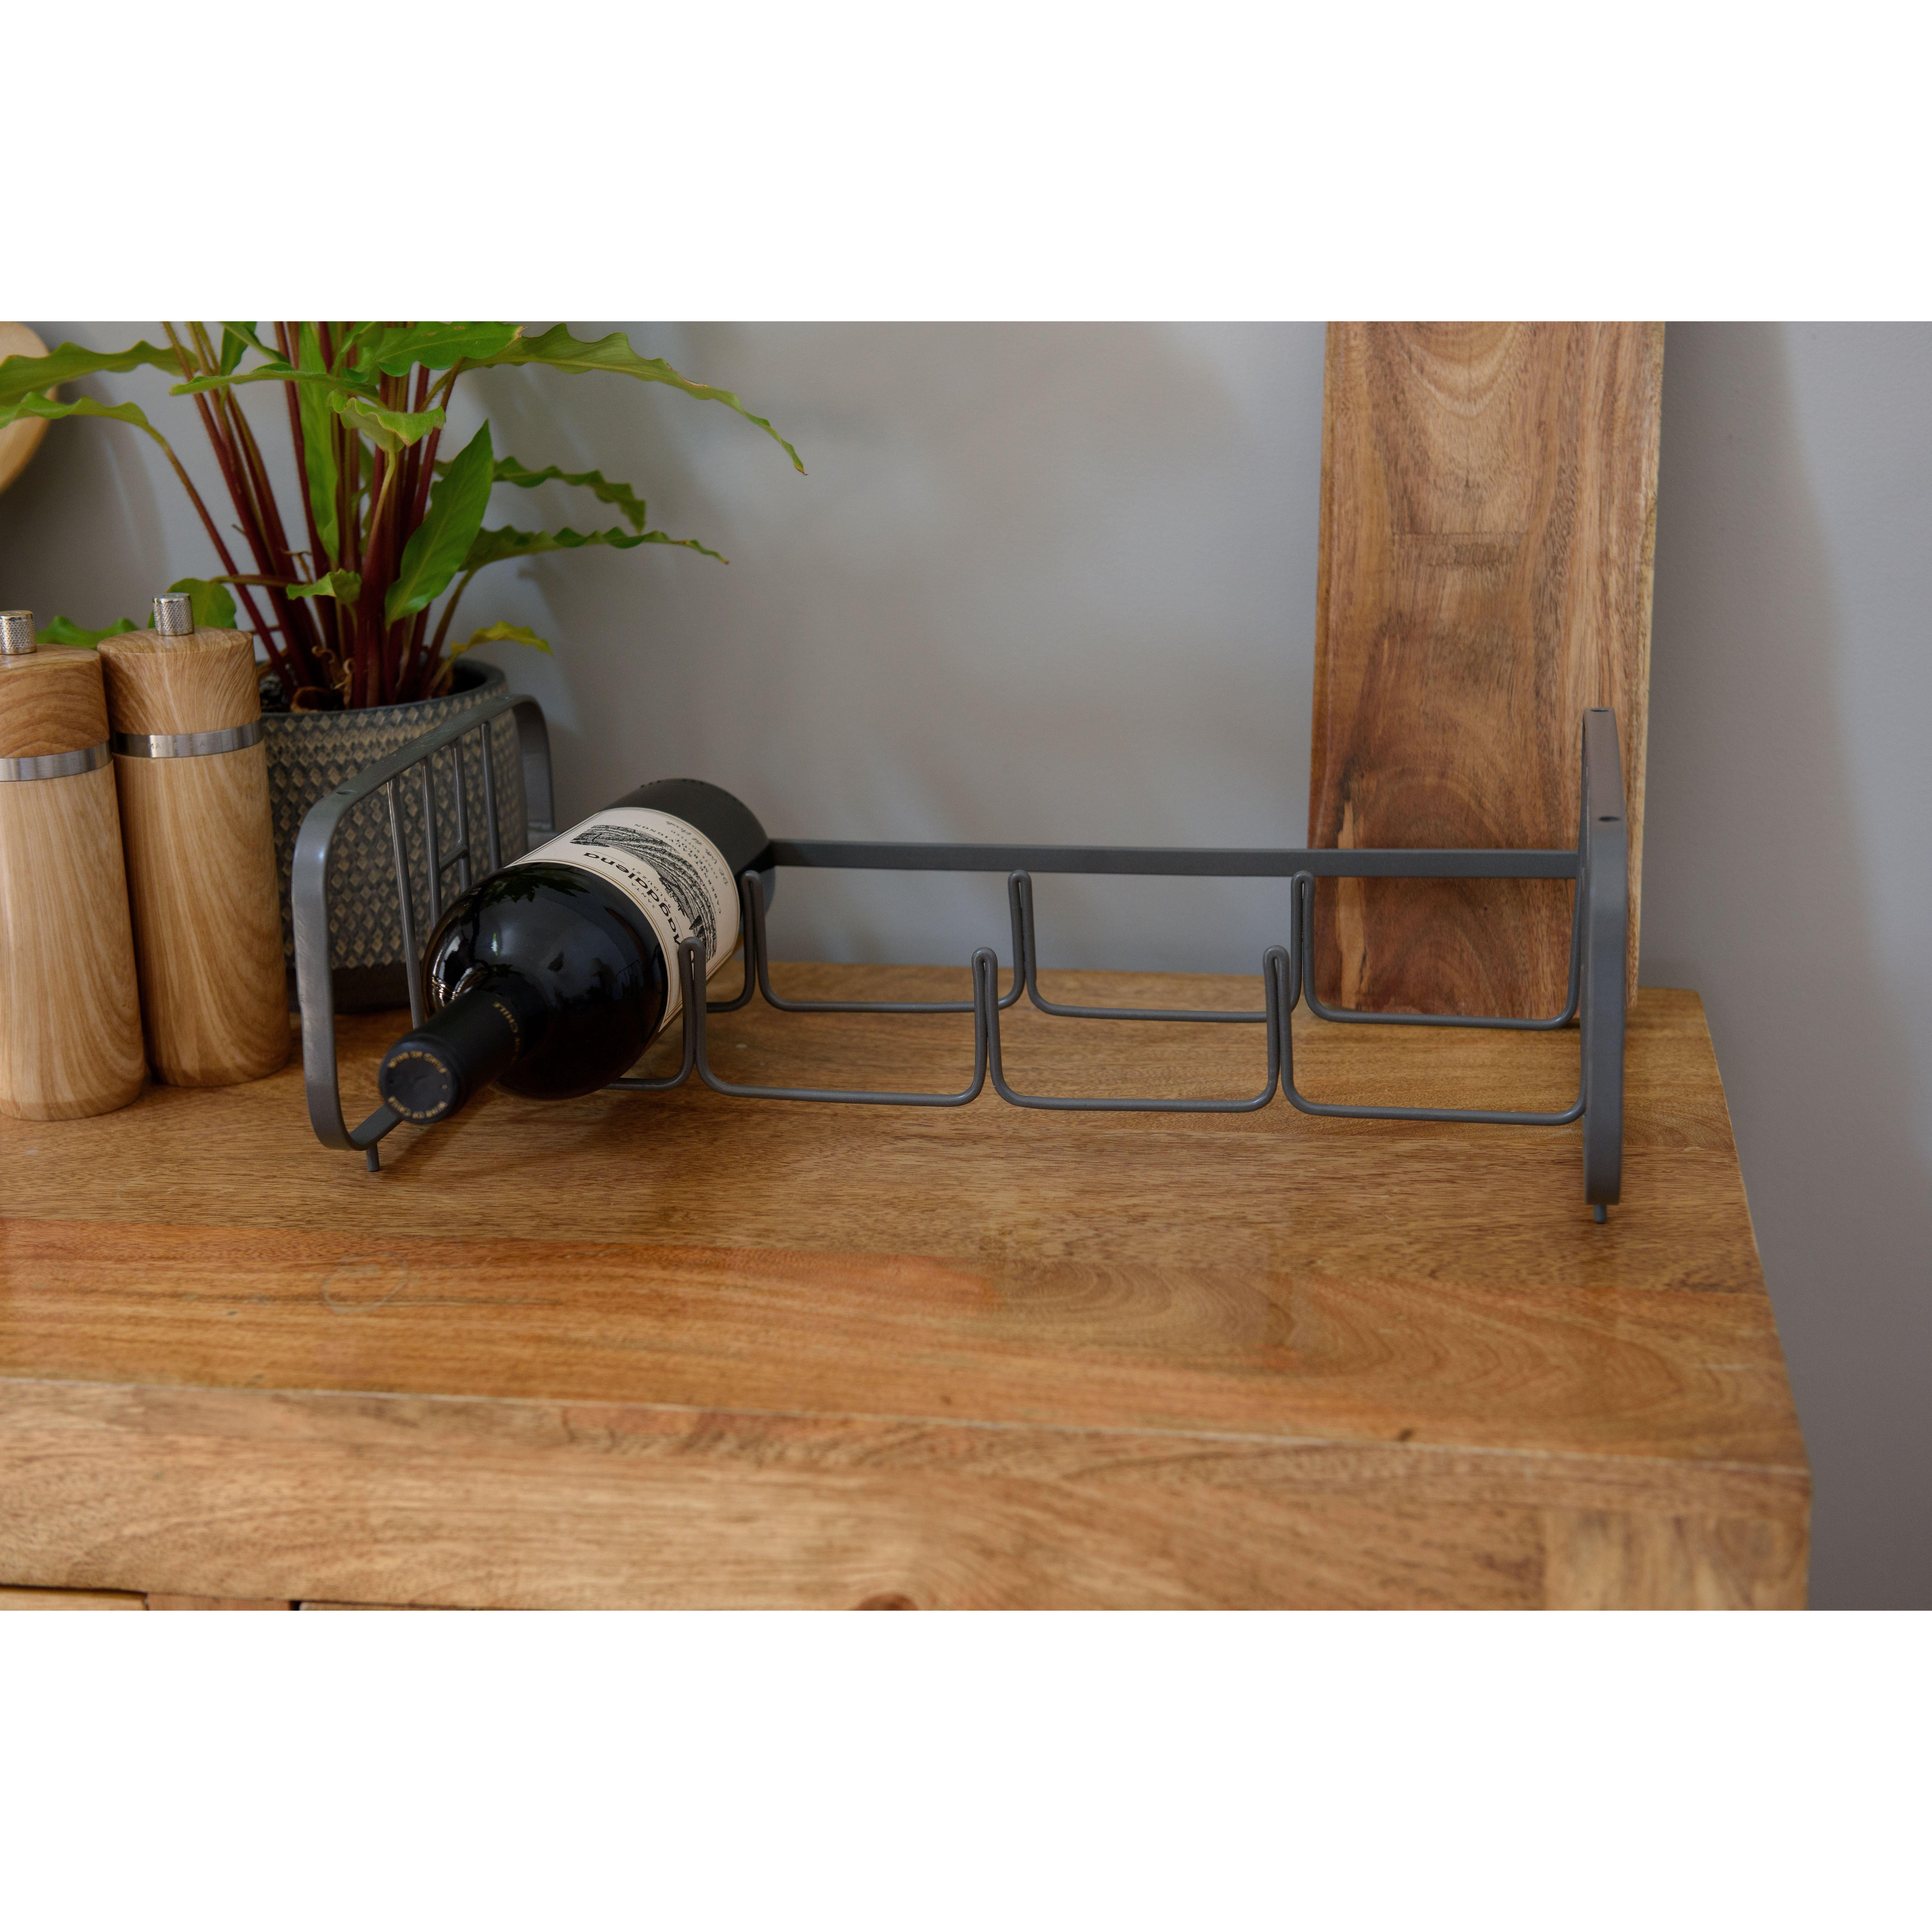 Stackable Bottle Rack, Iron Wire - image 1